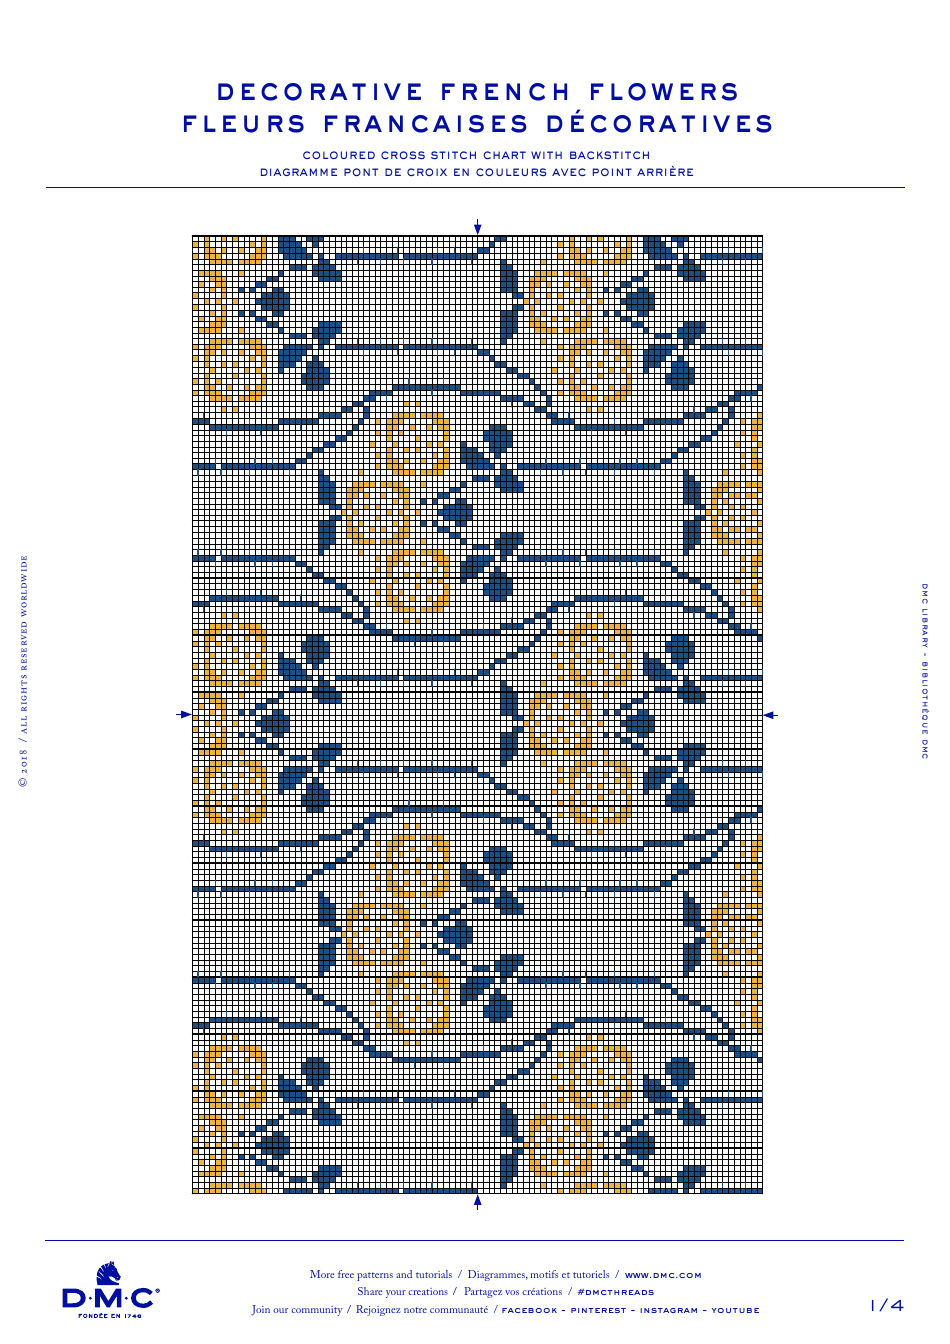 Decorative French Flowers Cross Stitch Pattern (English/French) Preview- Templateroller